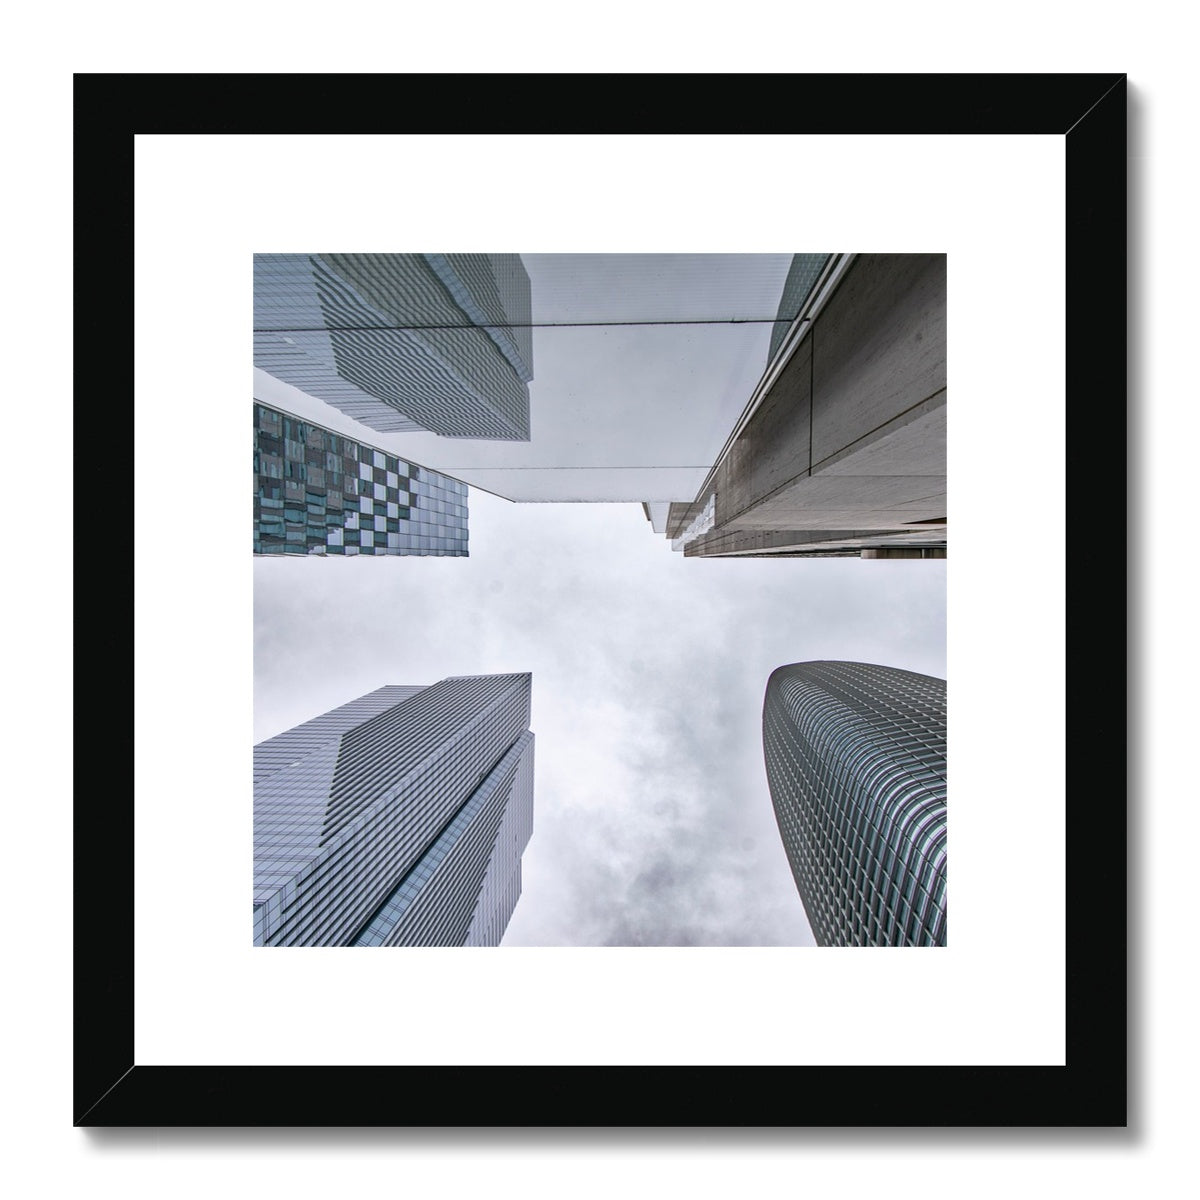 The towers Framed & Mounted Print